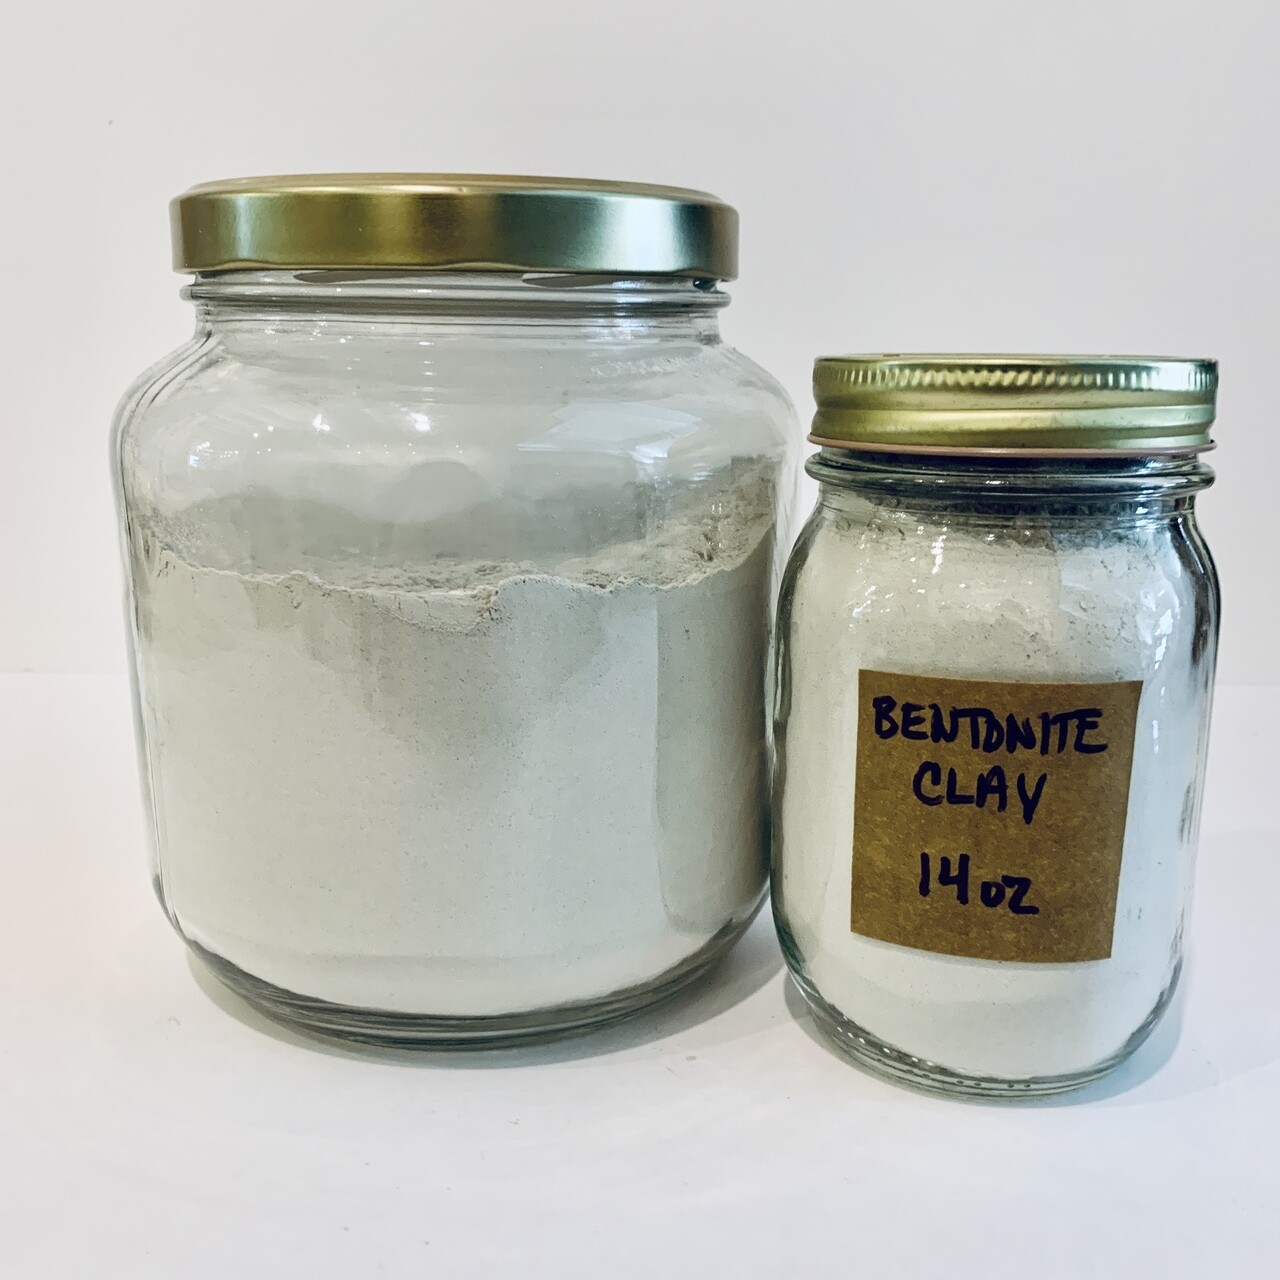 Bentonite Clay - by the ounce